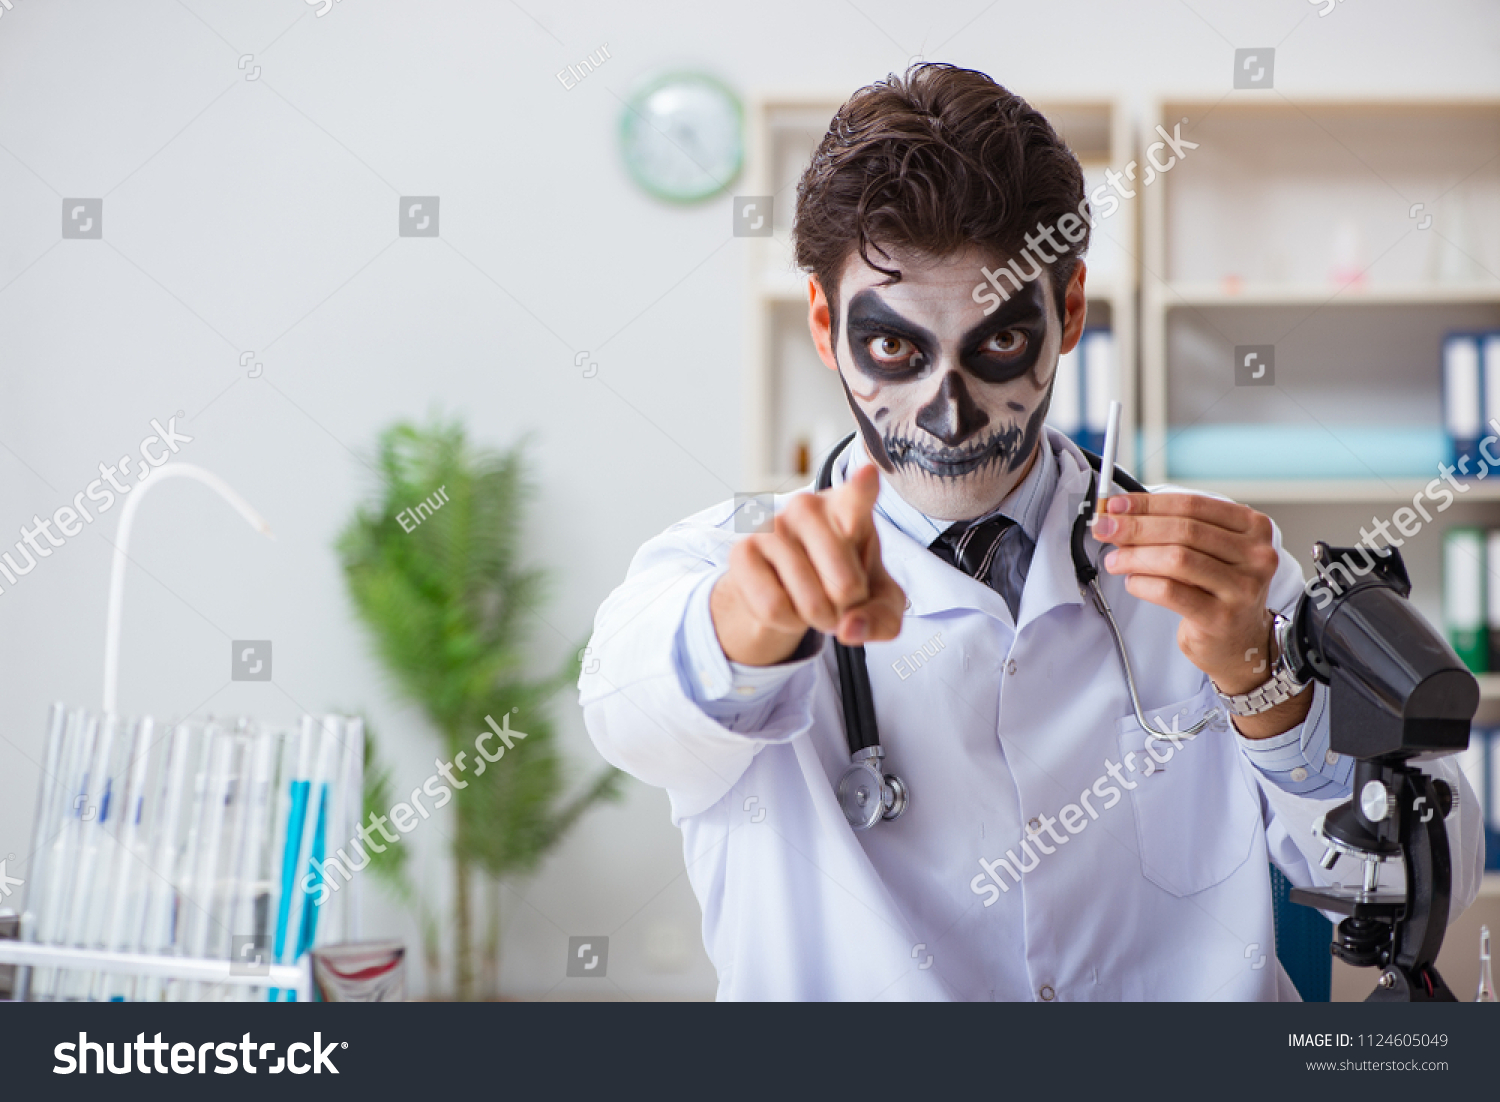 Scary monster doctor working in lab #1124605049